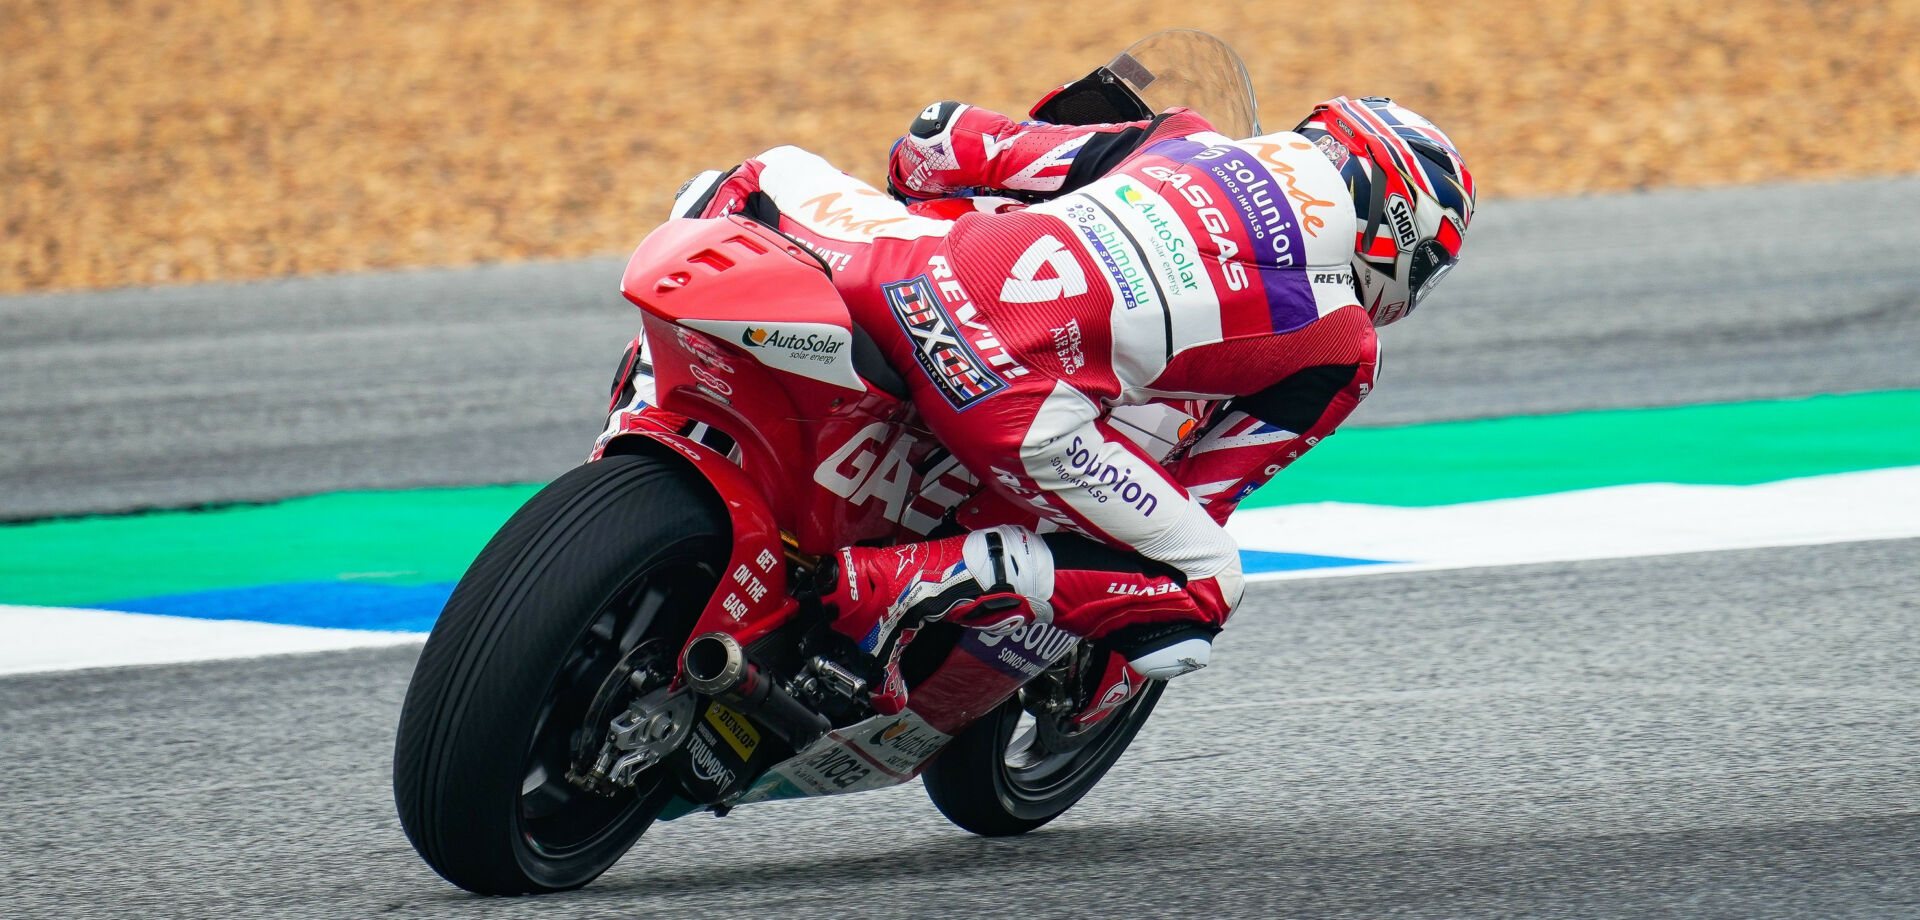 Jake Dixon (96), as seen during wet FP1 in Thailand. Photo courtesy Dorna.